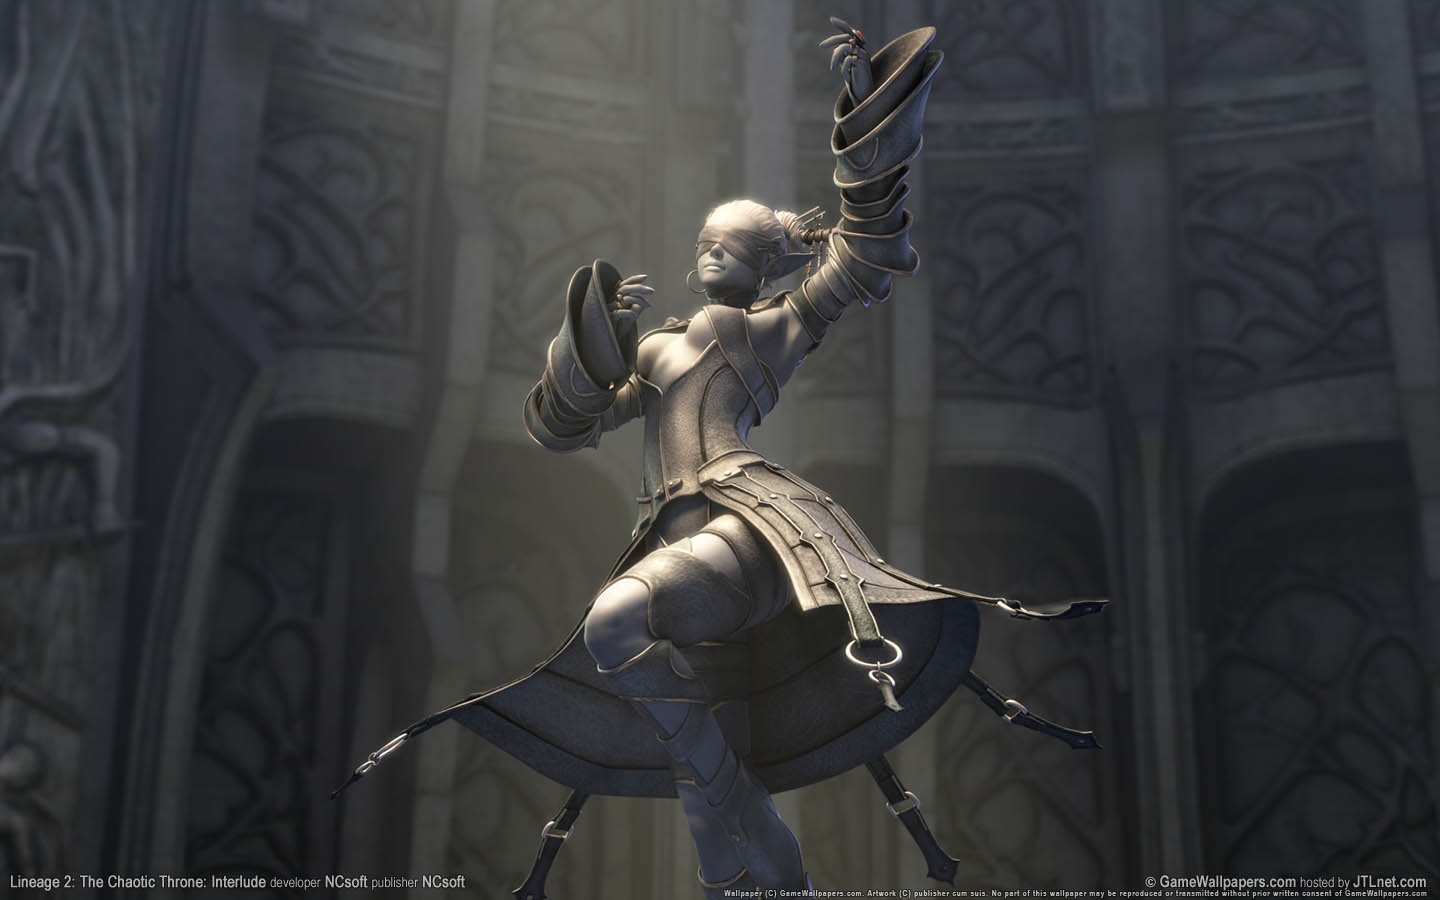 Lineage 2: The Chaotic Throne: Interlude achtergrond 02 1440x900